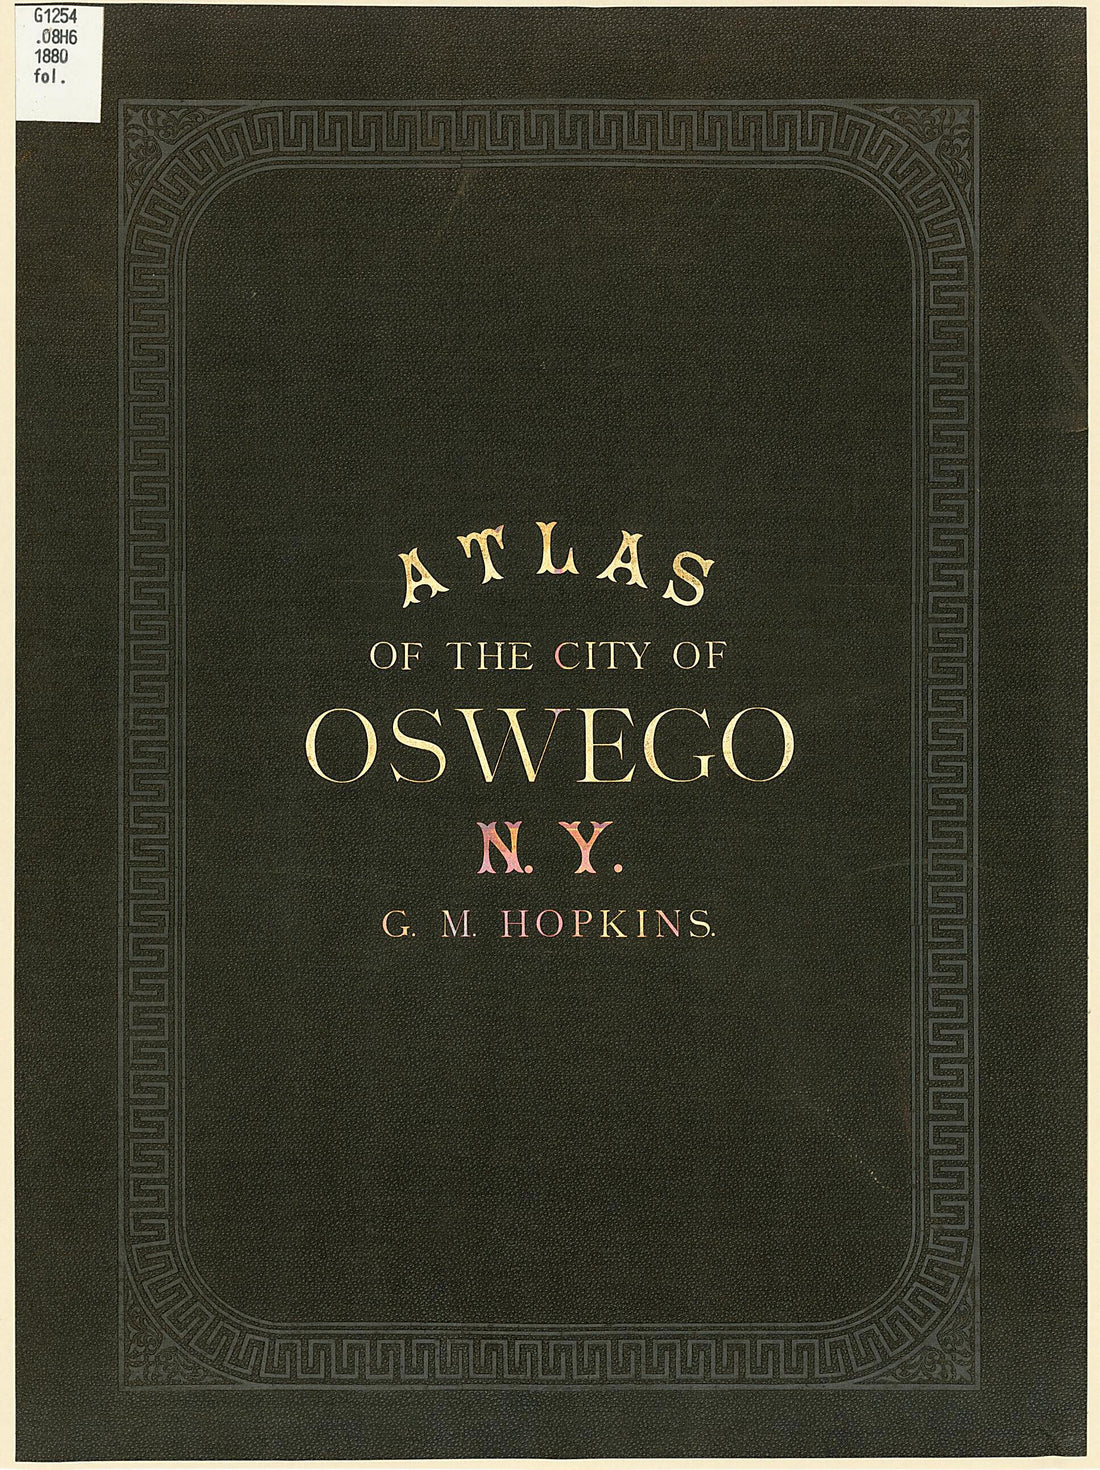 This old map of City Atlas of Oswego, New York : from Official Records, Private Plans and Actual Surveys. (Atlas of the City of Oswego N.Y.) from 1880 was created by Griffith Morgan Hopkins in 1880